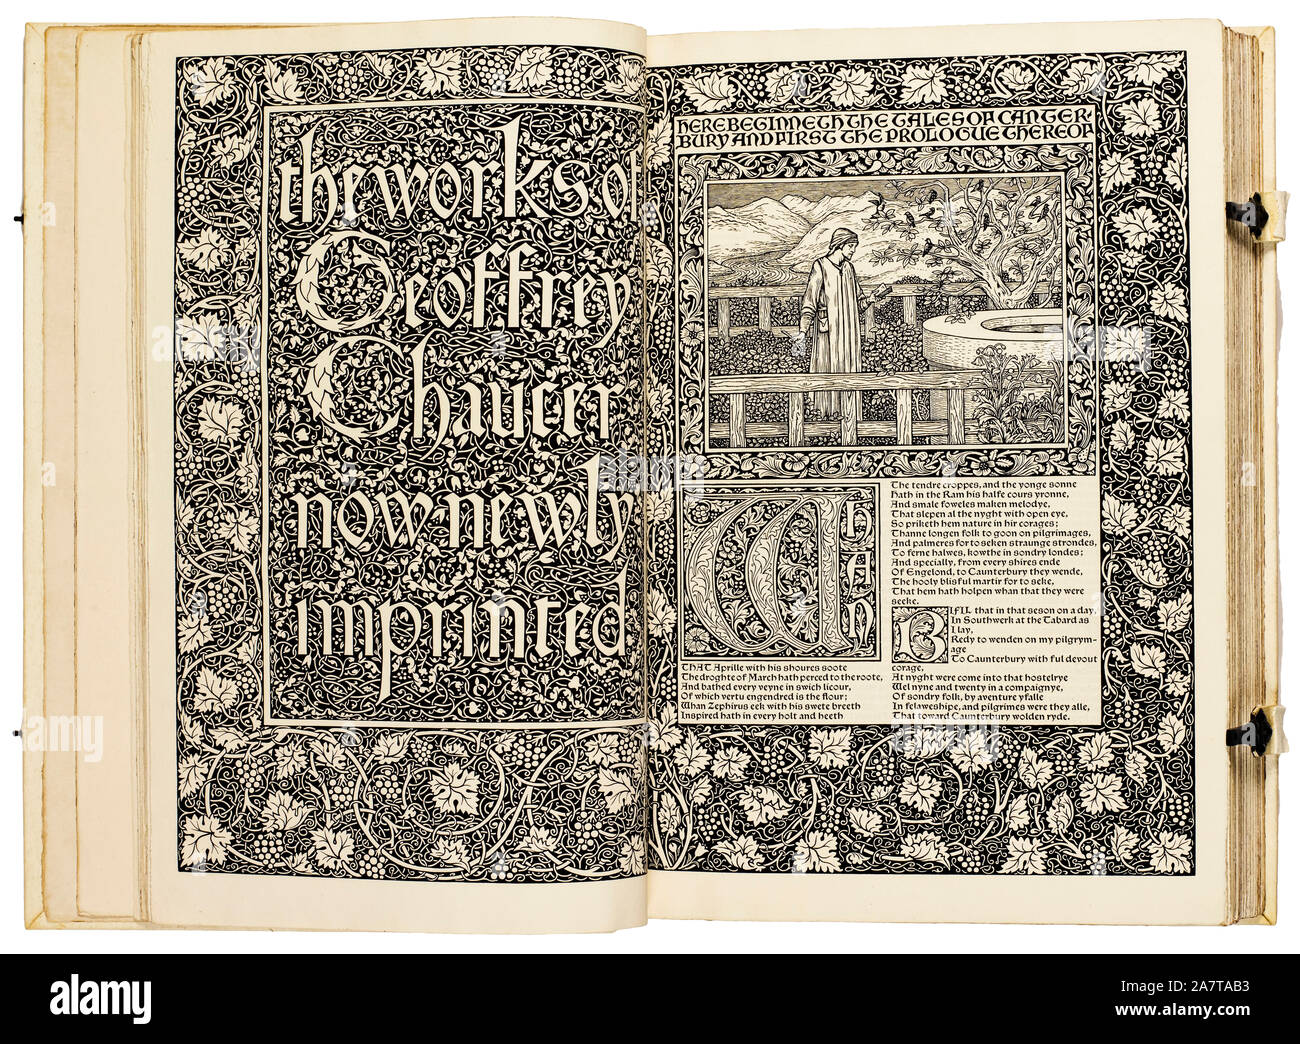 William Morris, Illustrated book, The works of Geoffrey Chaucer, illustration, 1896 Stock Photo